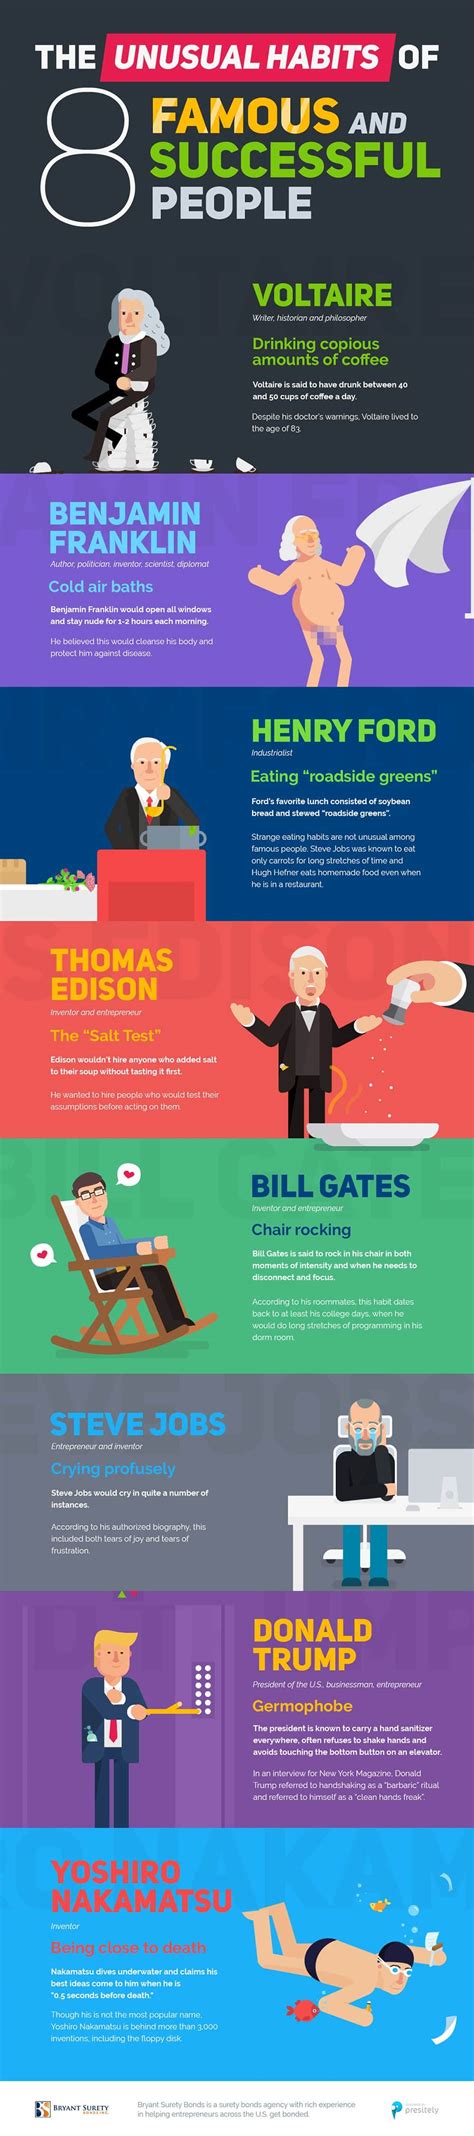 The Unusual Habits of Famous People - Infographic